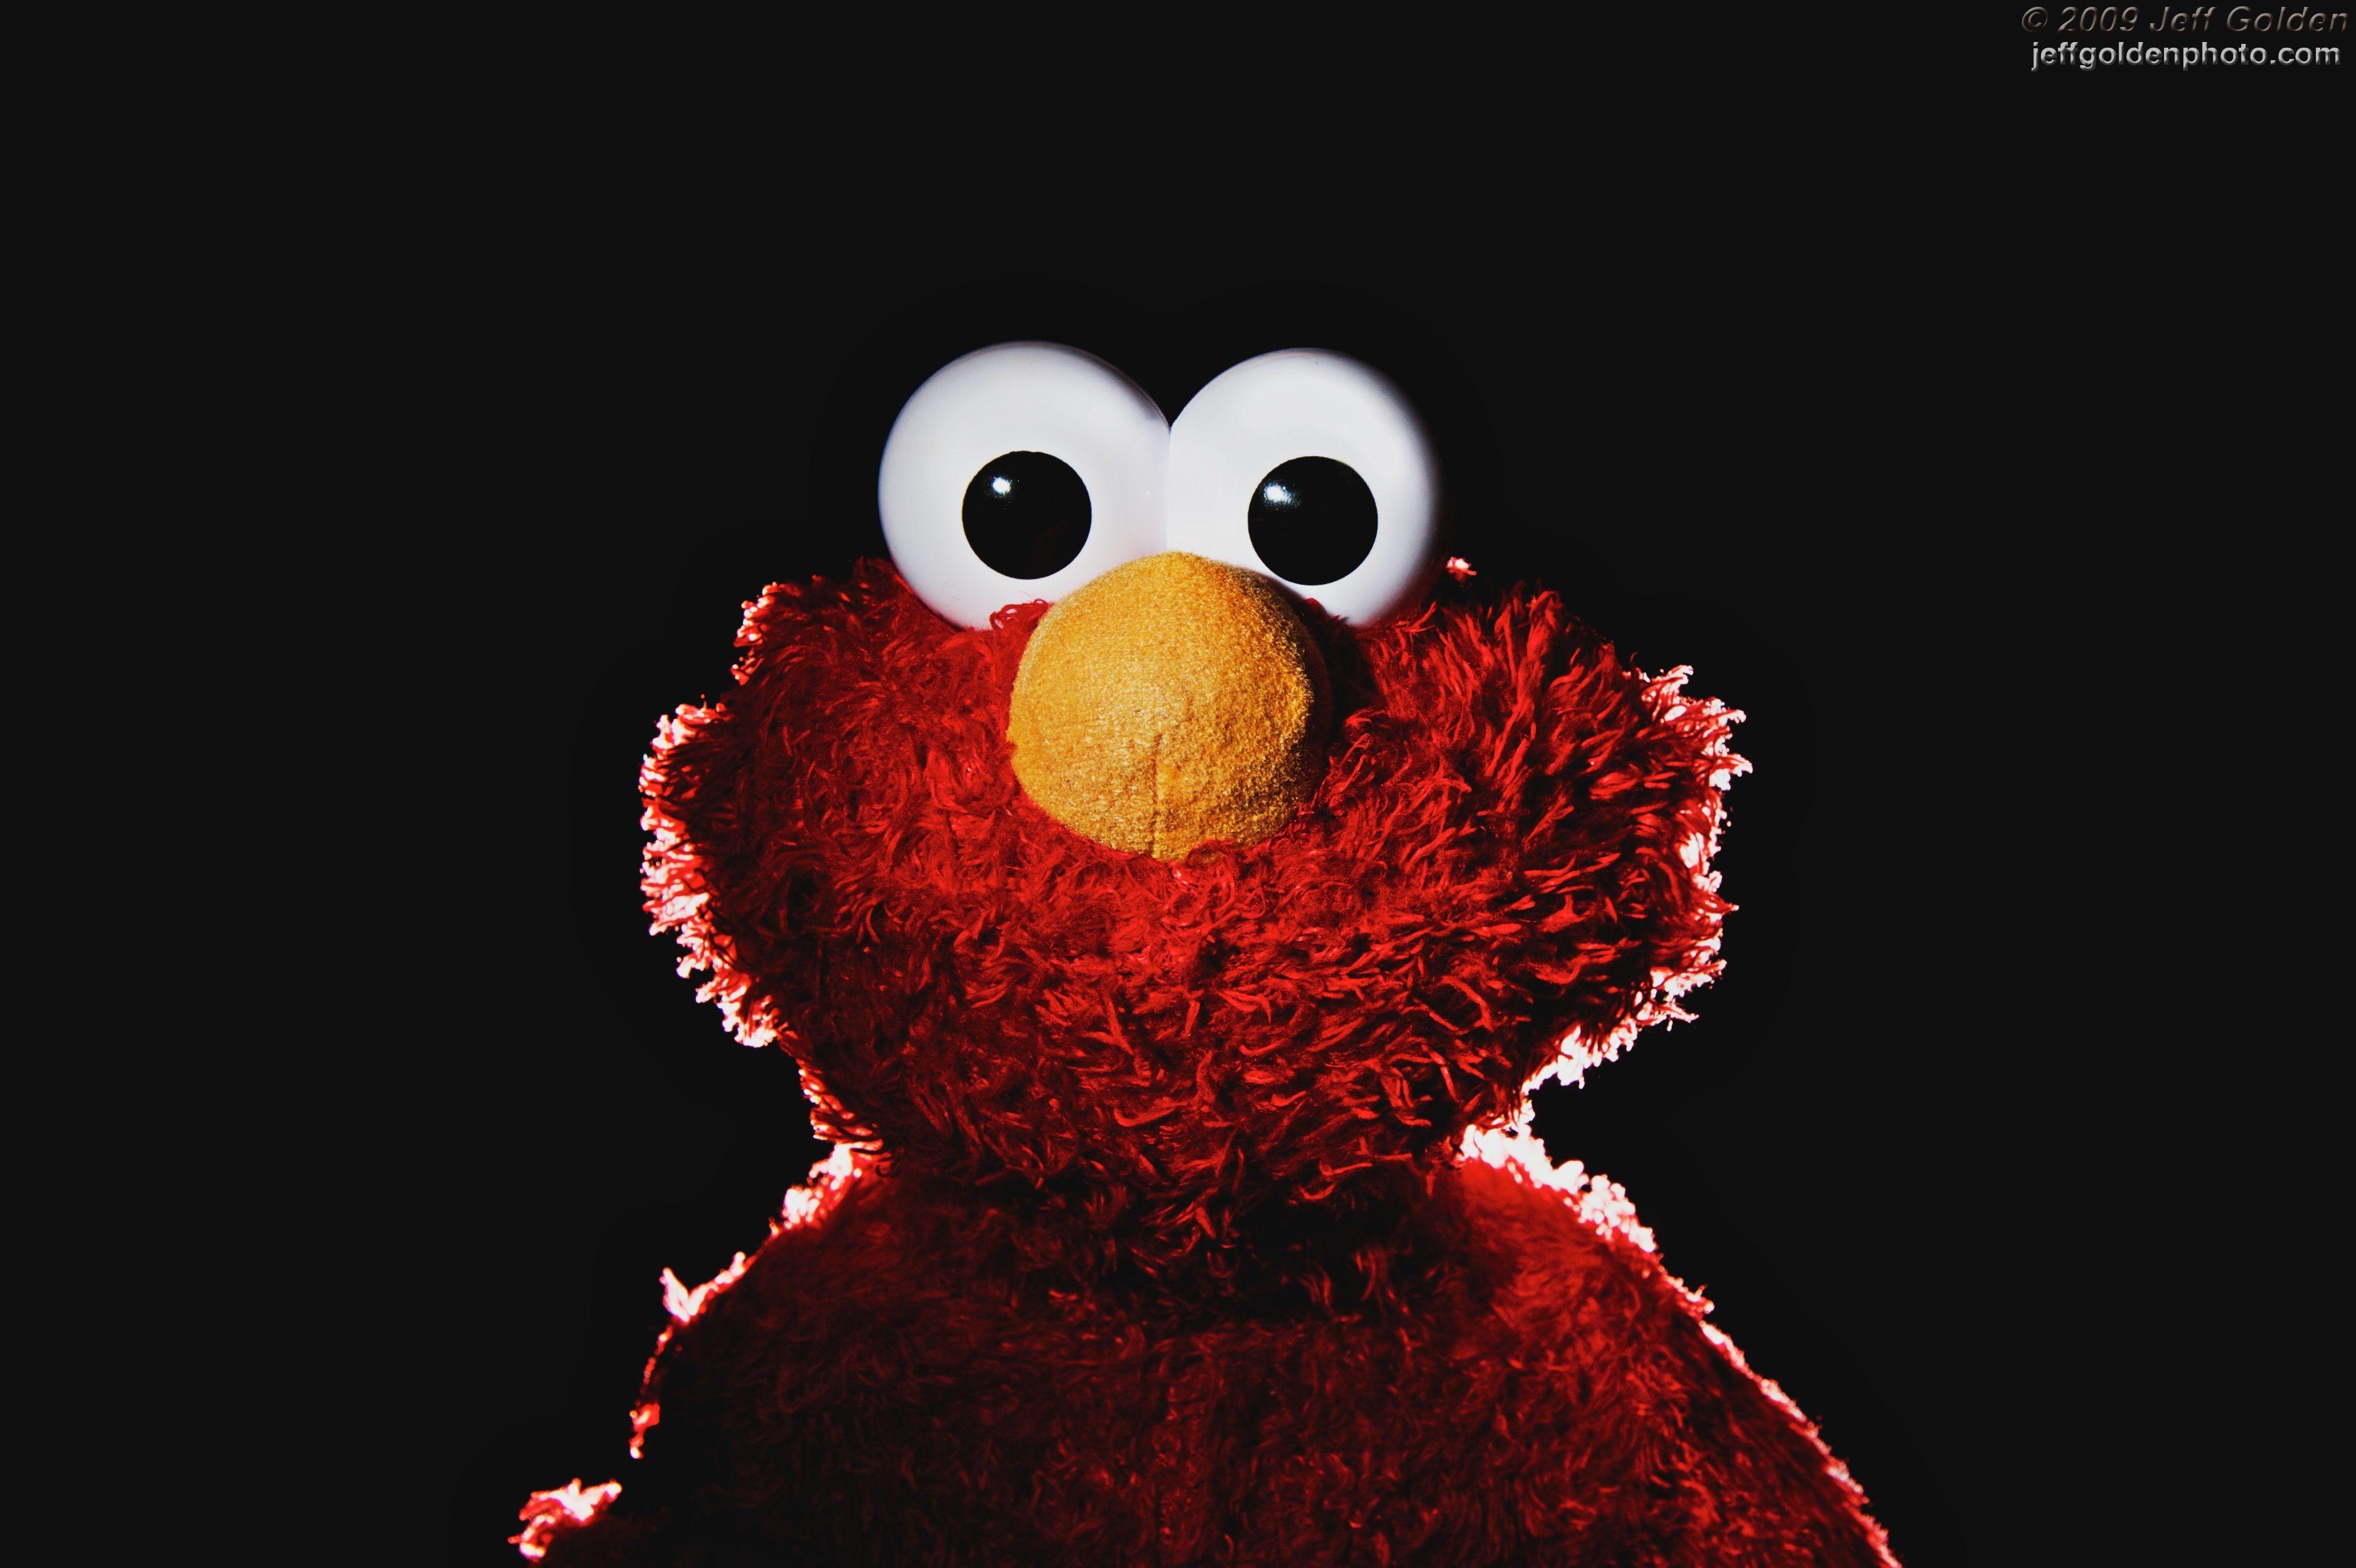 Elmo in the dark. Projects to Try. Elmo wallpaper, Elmo